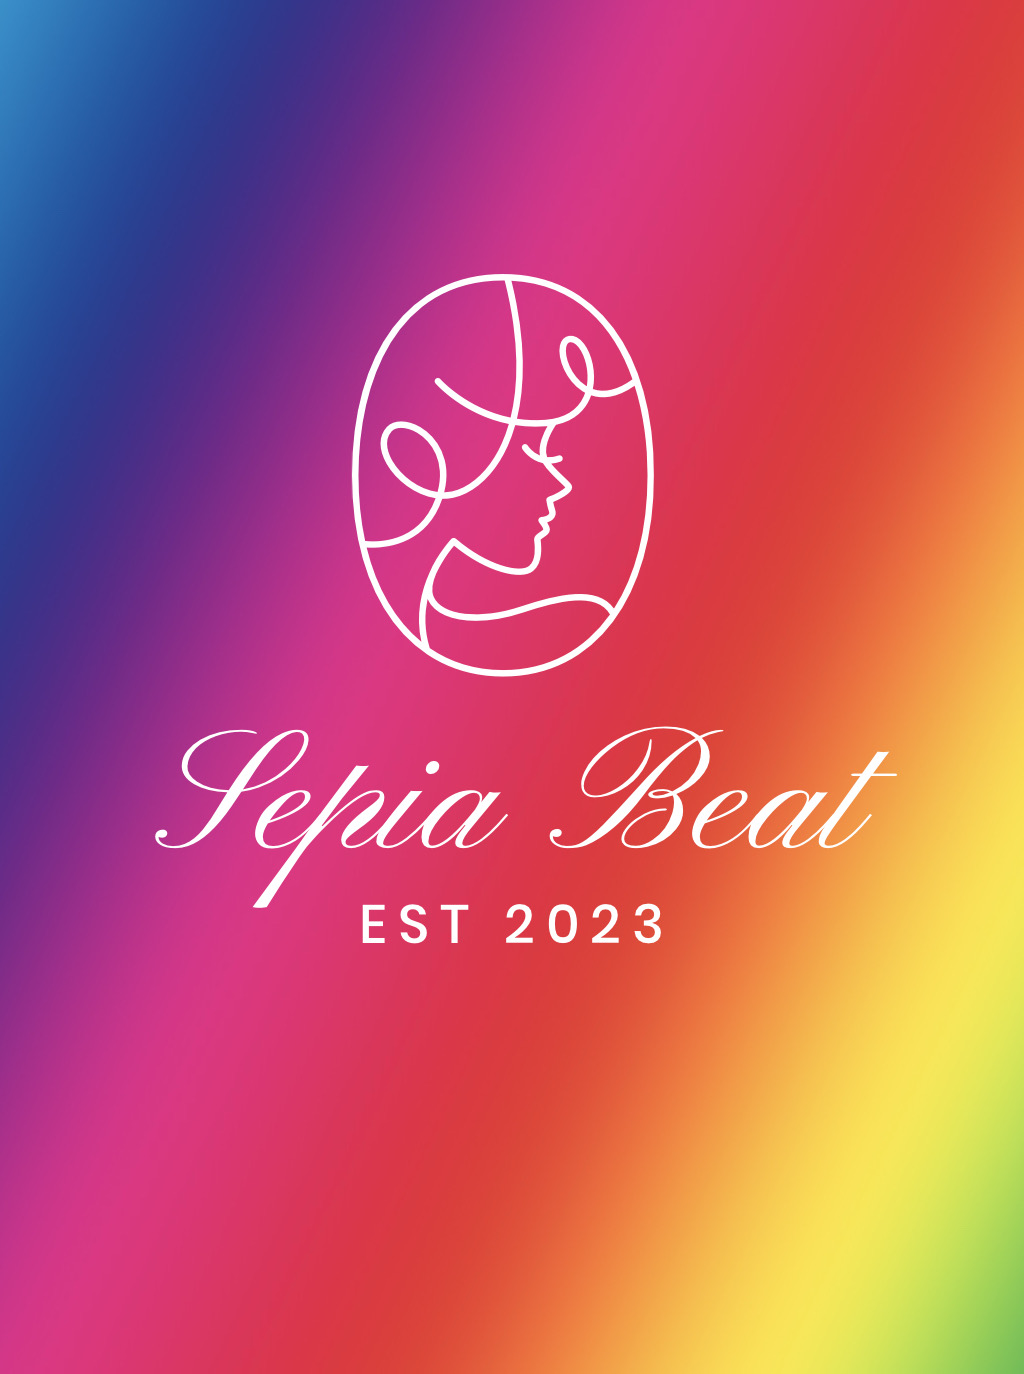 Sepia Beat Official Site